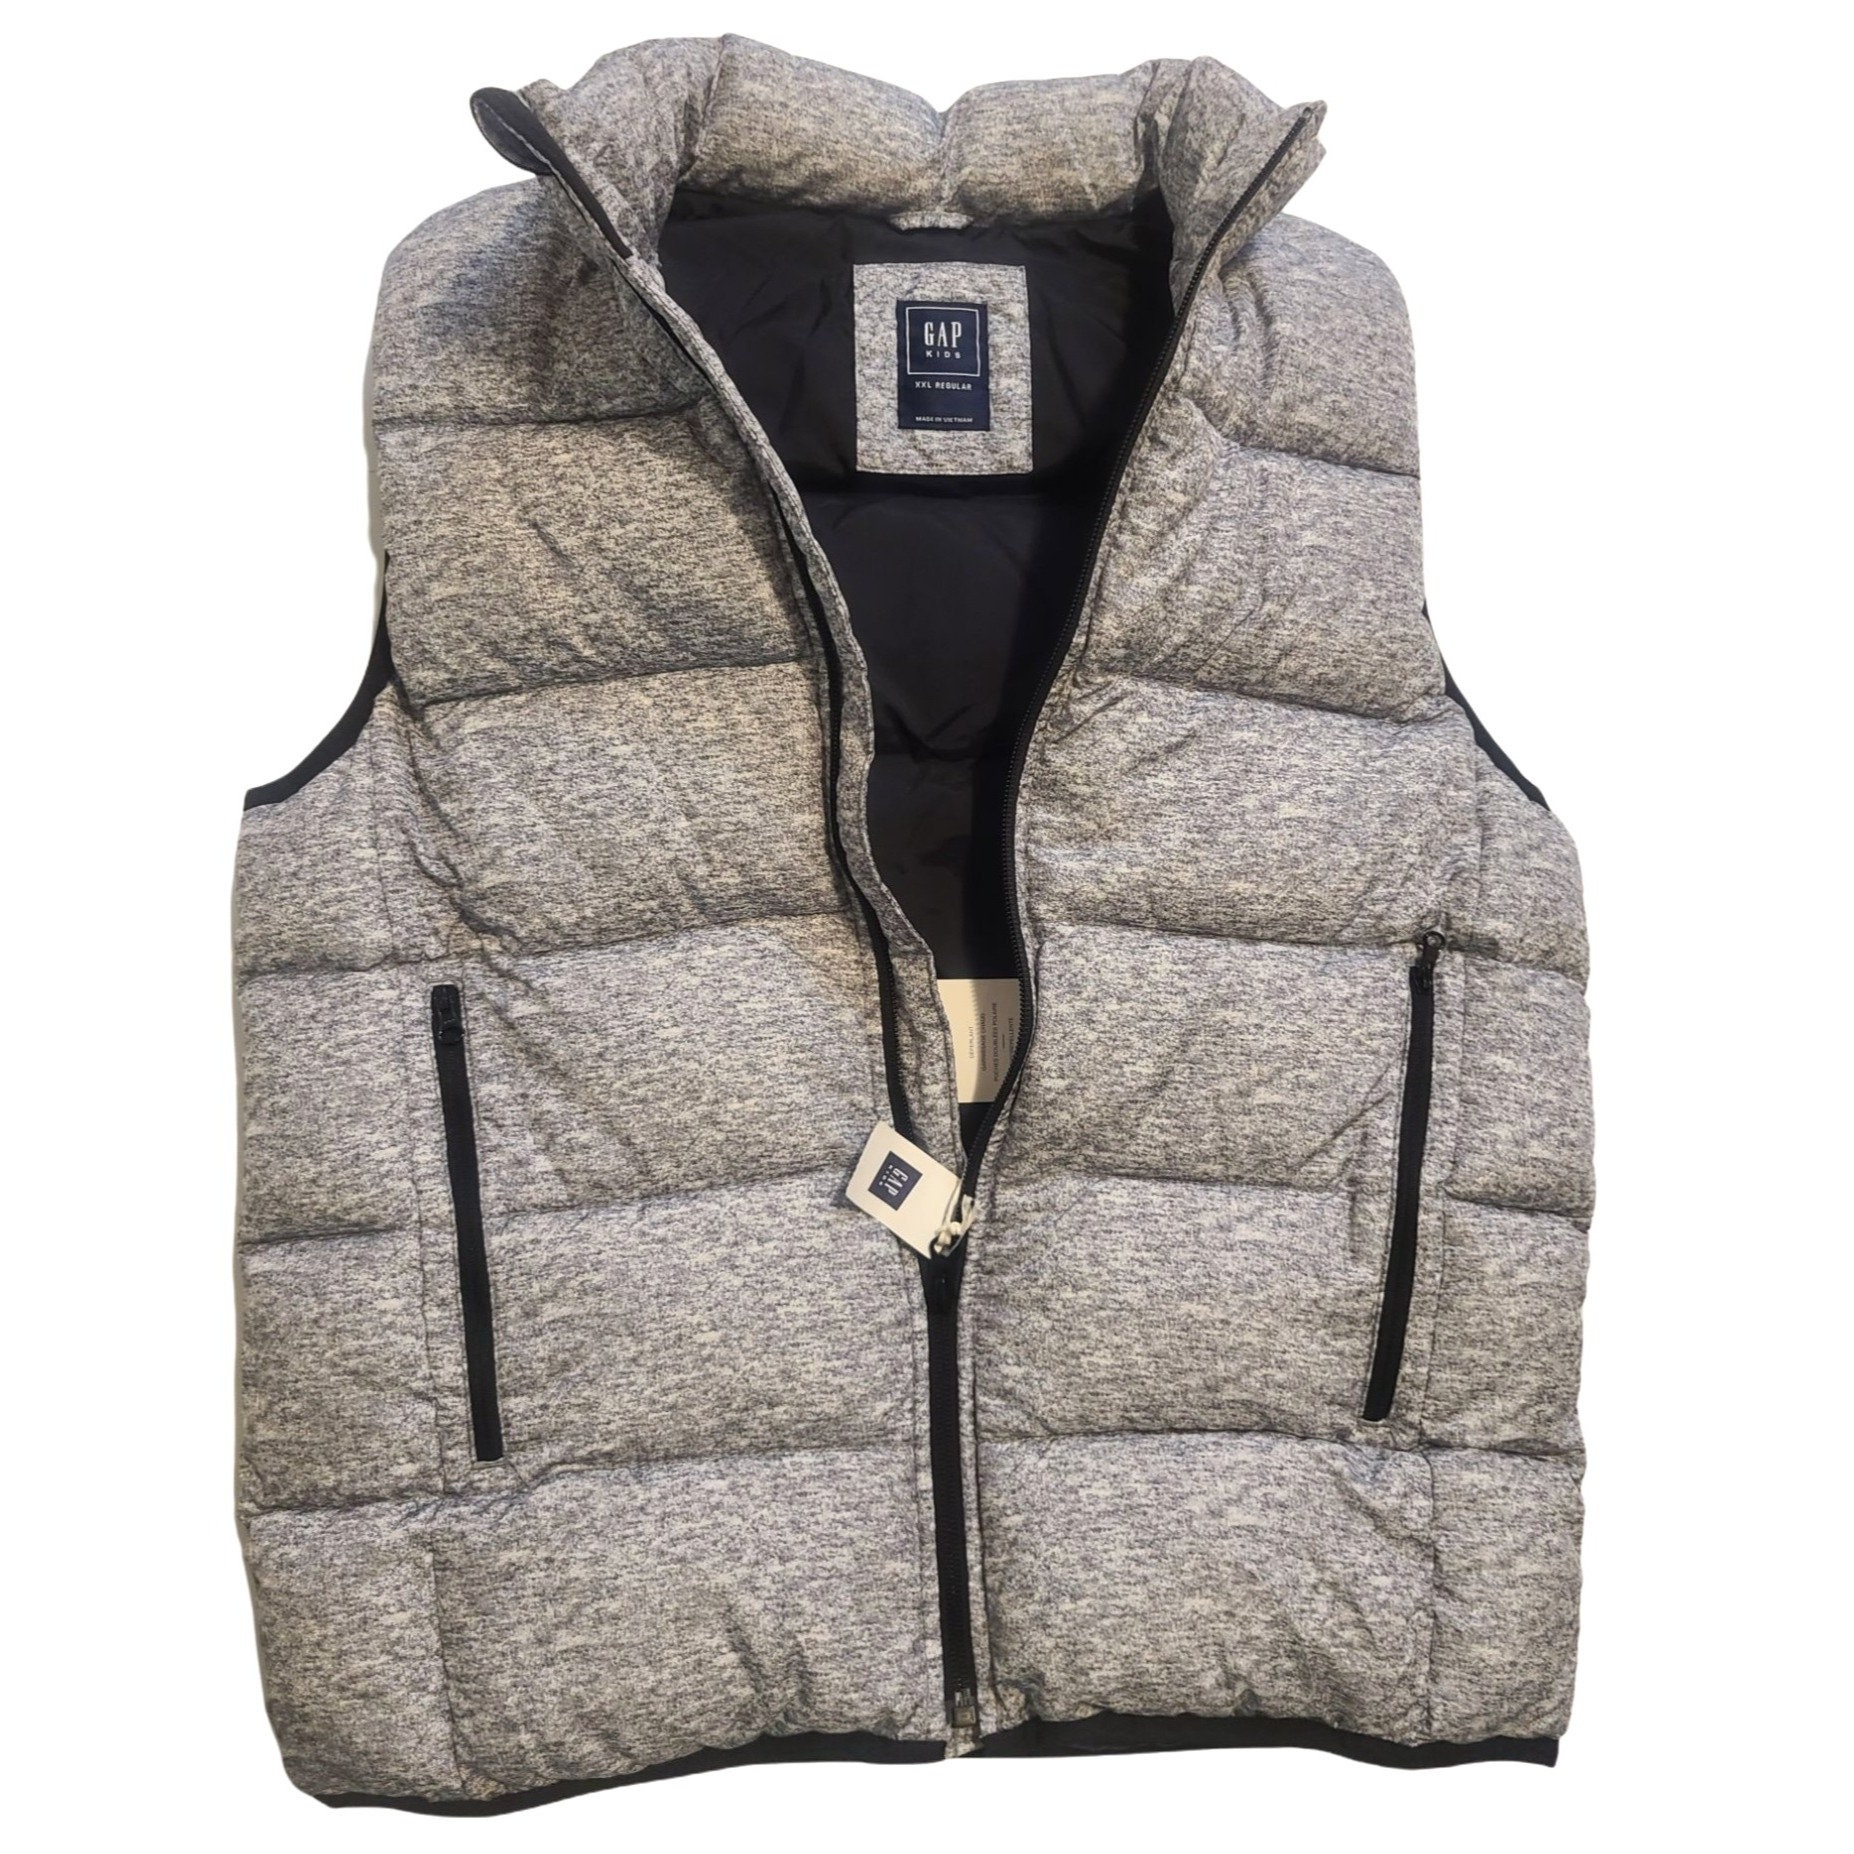 Glam Pocketed Quilted Puffer Vest - White Small